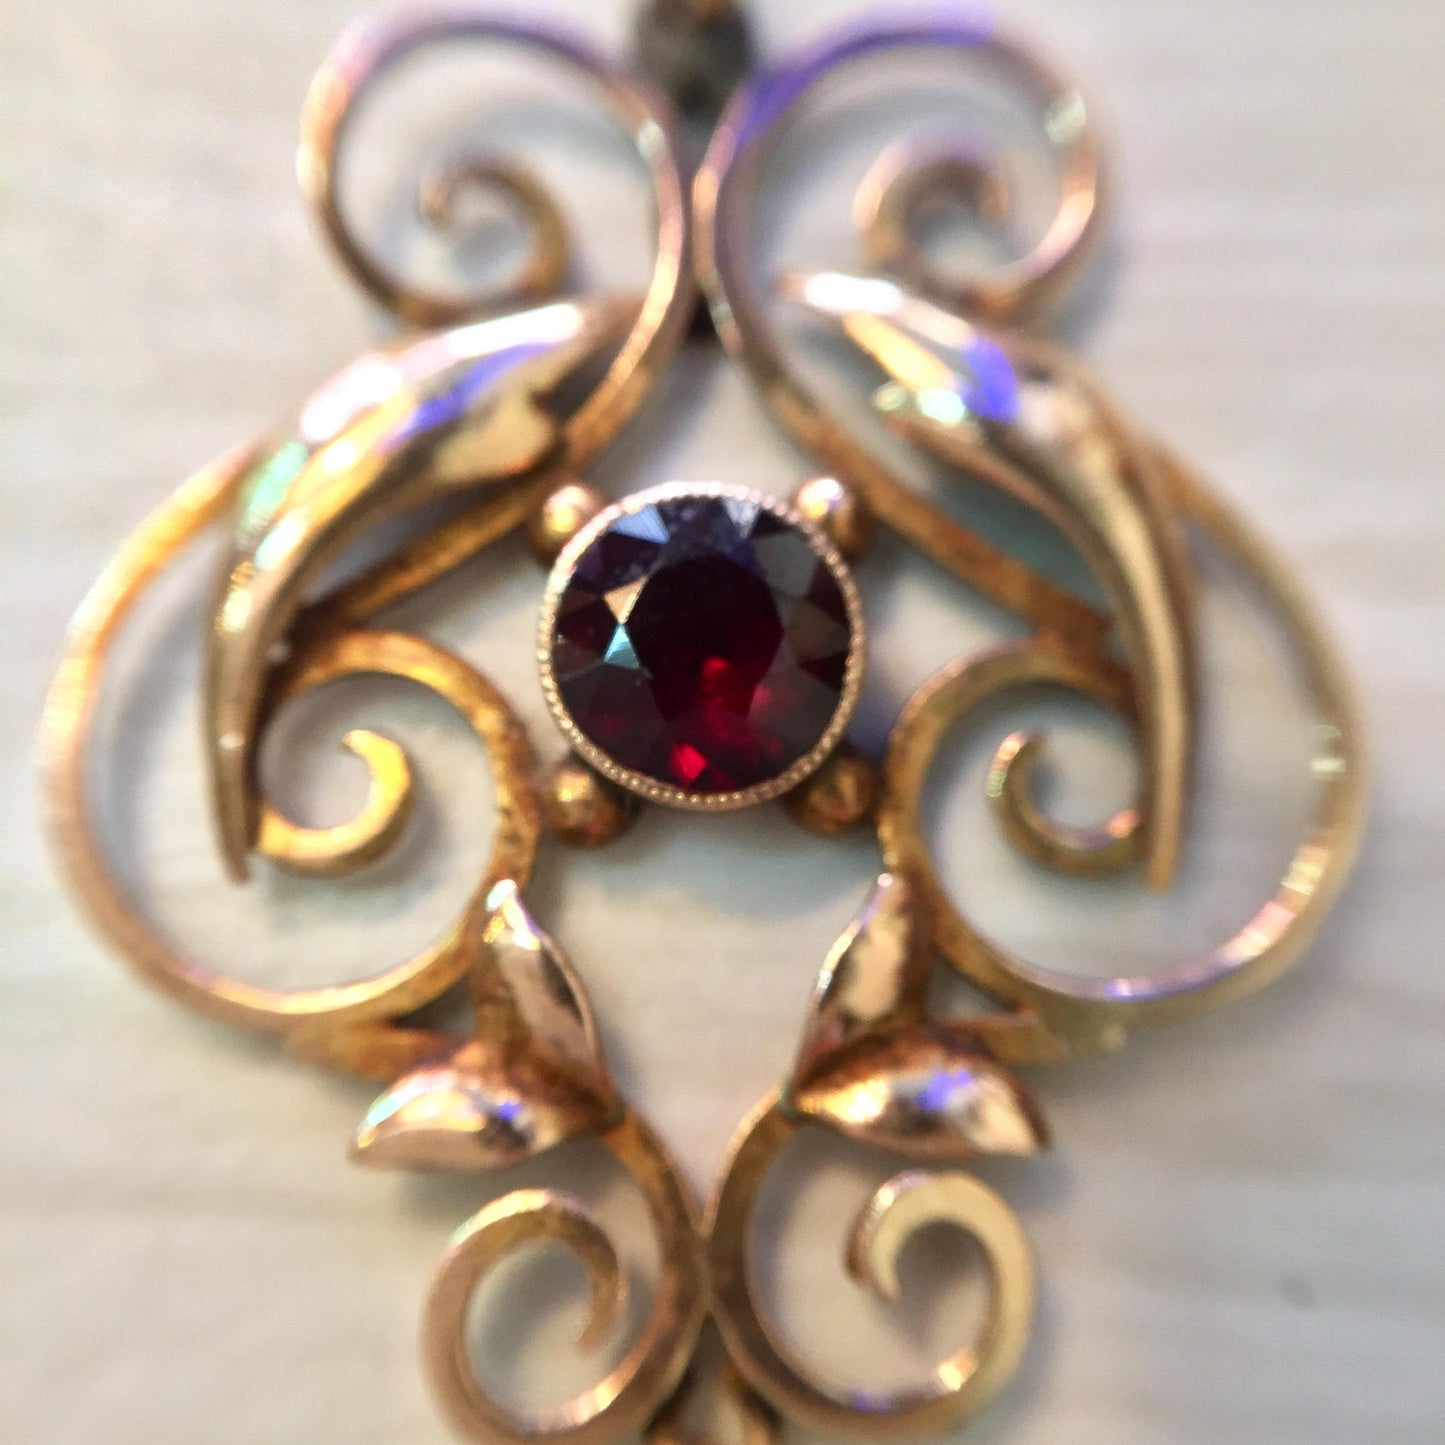 Antique 10K gold pendant featuring an intricate swirl design with a deep purple amethyst stone at the center and iridescent freshwater pearls accenting the ornate curves, creating an elegant and timeless piece of jewelry.